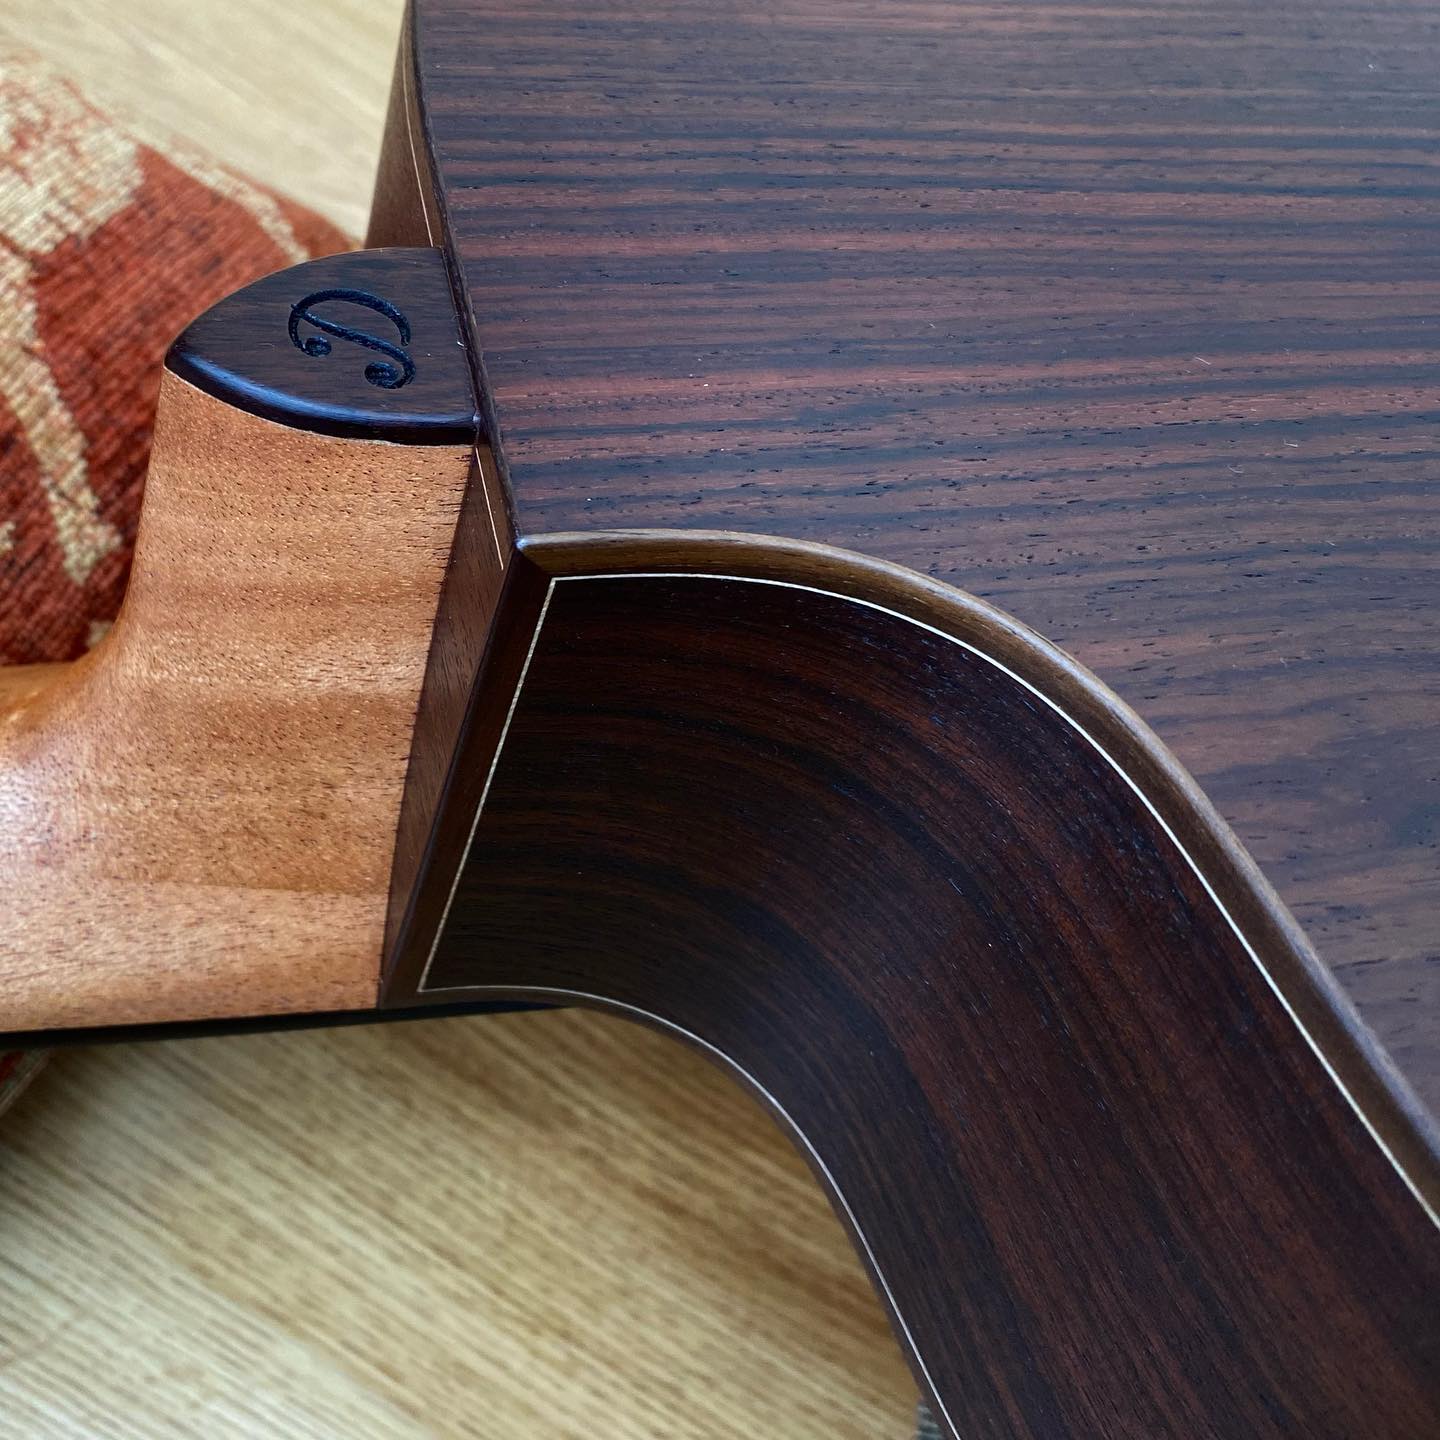 Dowina Rosewood Deluxe Models Exclusively Available At Richards Guitars